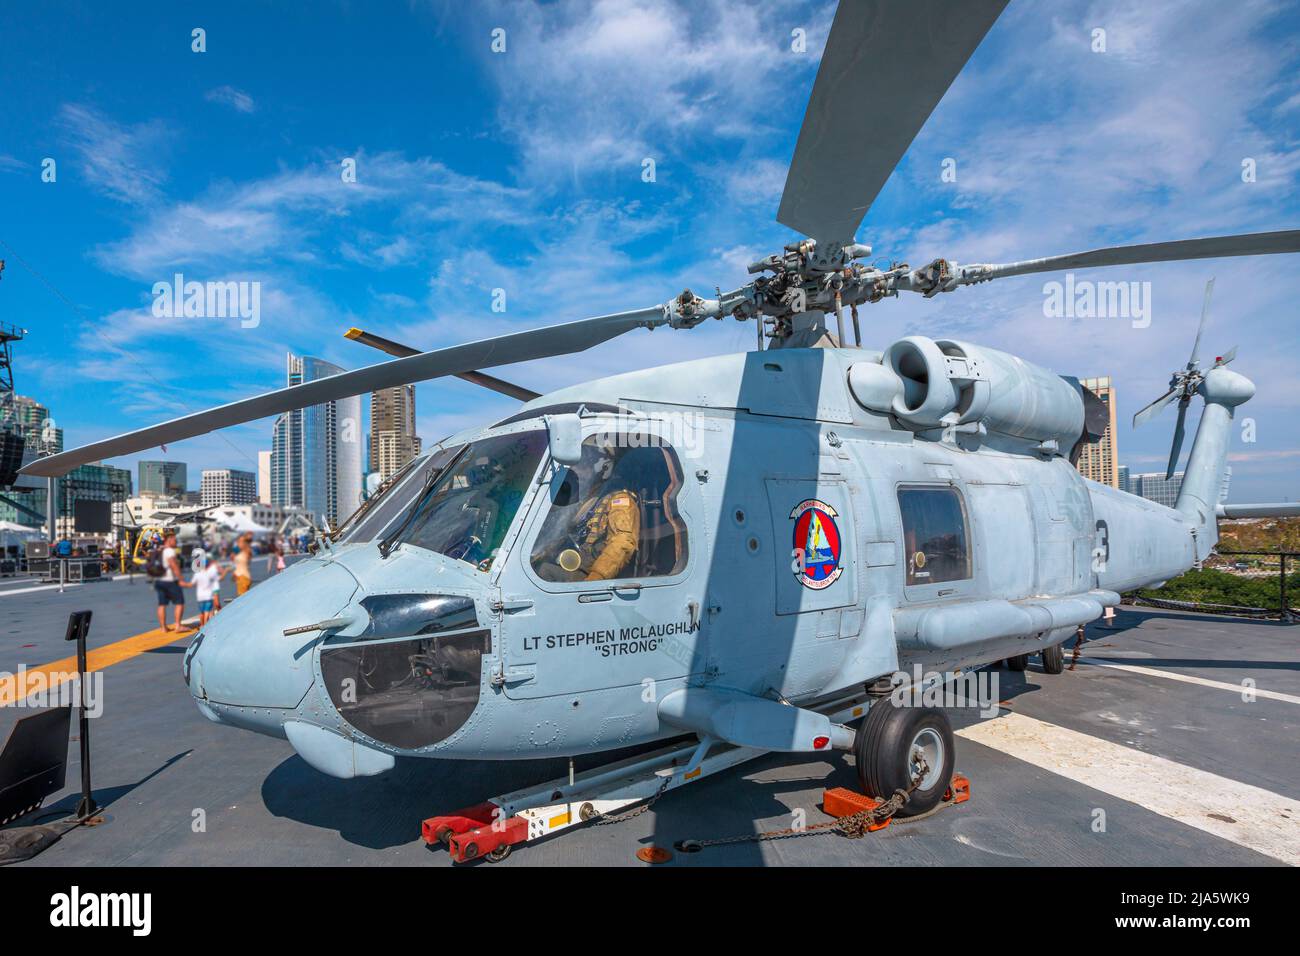 San Diego, California, United States - JULY 2018: Sikorsky SH-60 Seahawk helicopter of 1980s in American USS Midway Battleship Aviation museum. Stock Photo